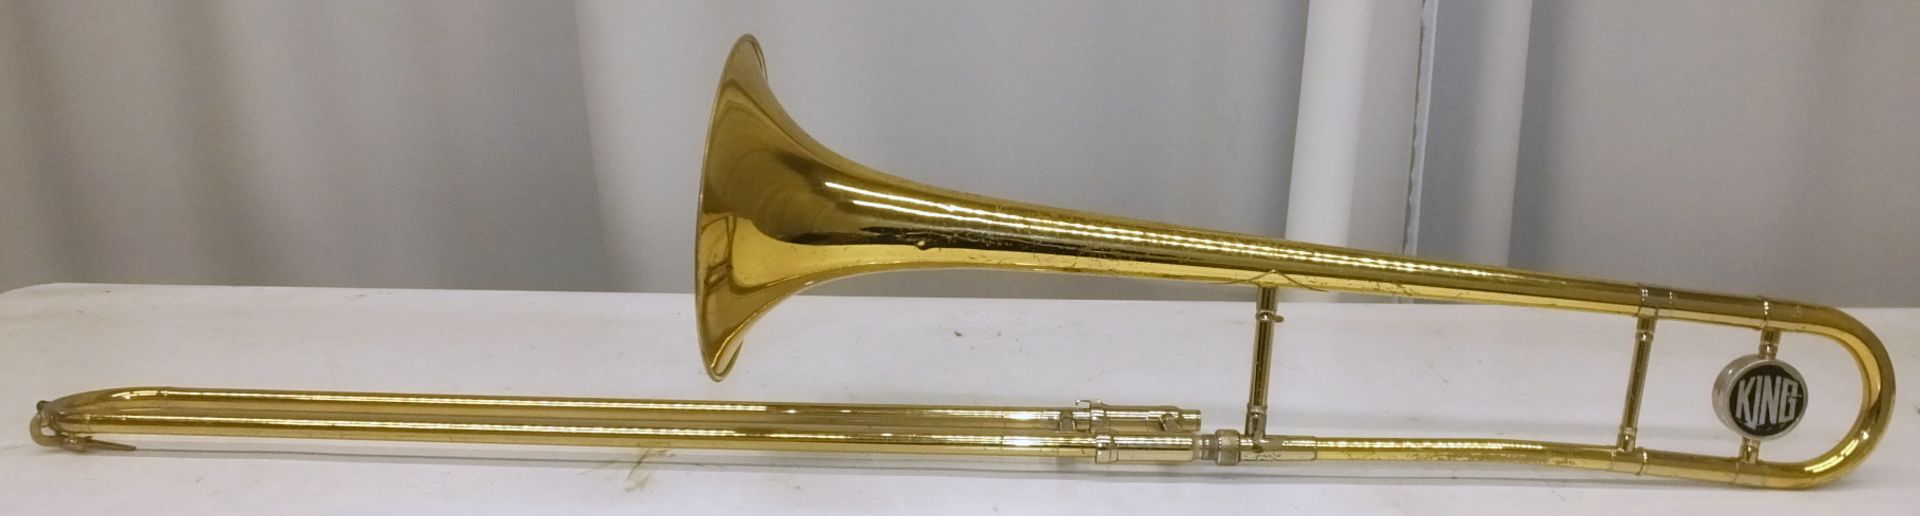 King Trombone in case - Serial Number - 108606 - A4984 (dents on instrument) - Image 12 of 16